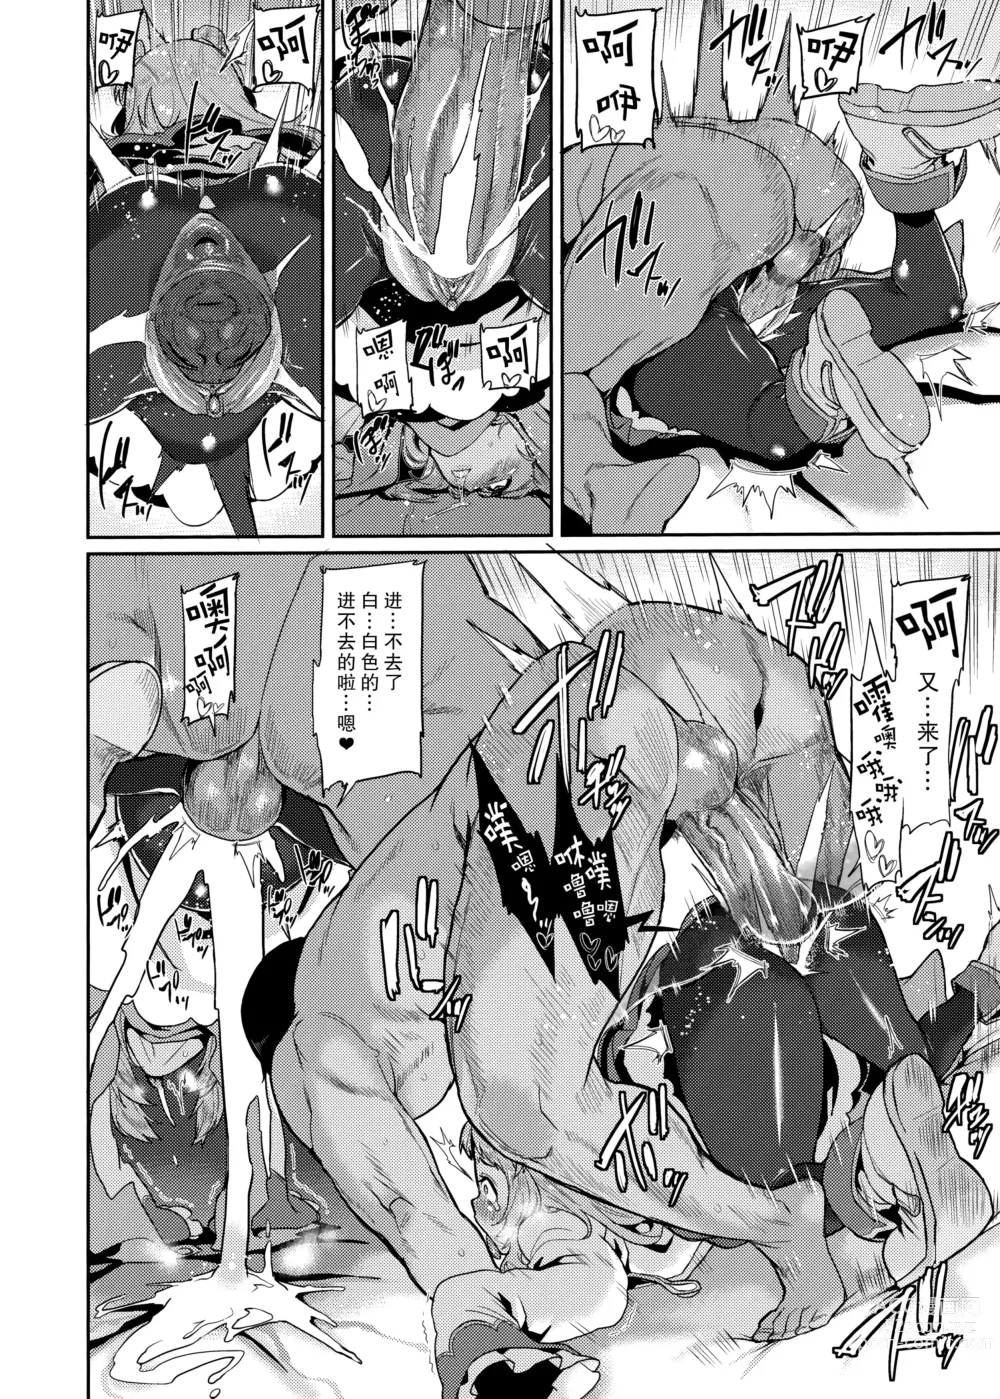 Page 14 of doujinshi Pudding Switch (decensored)